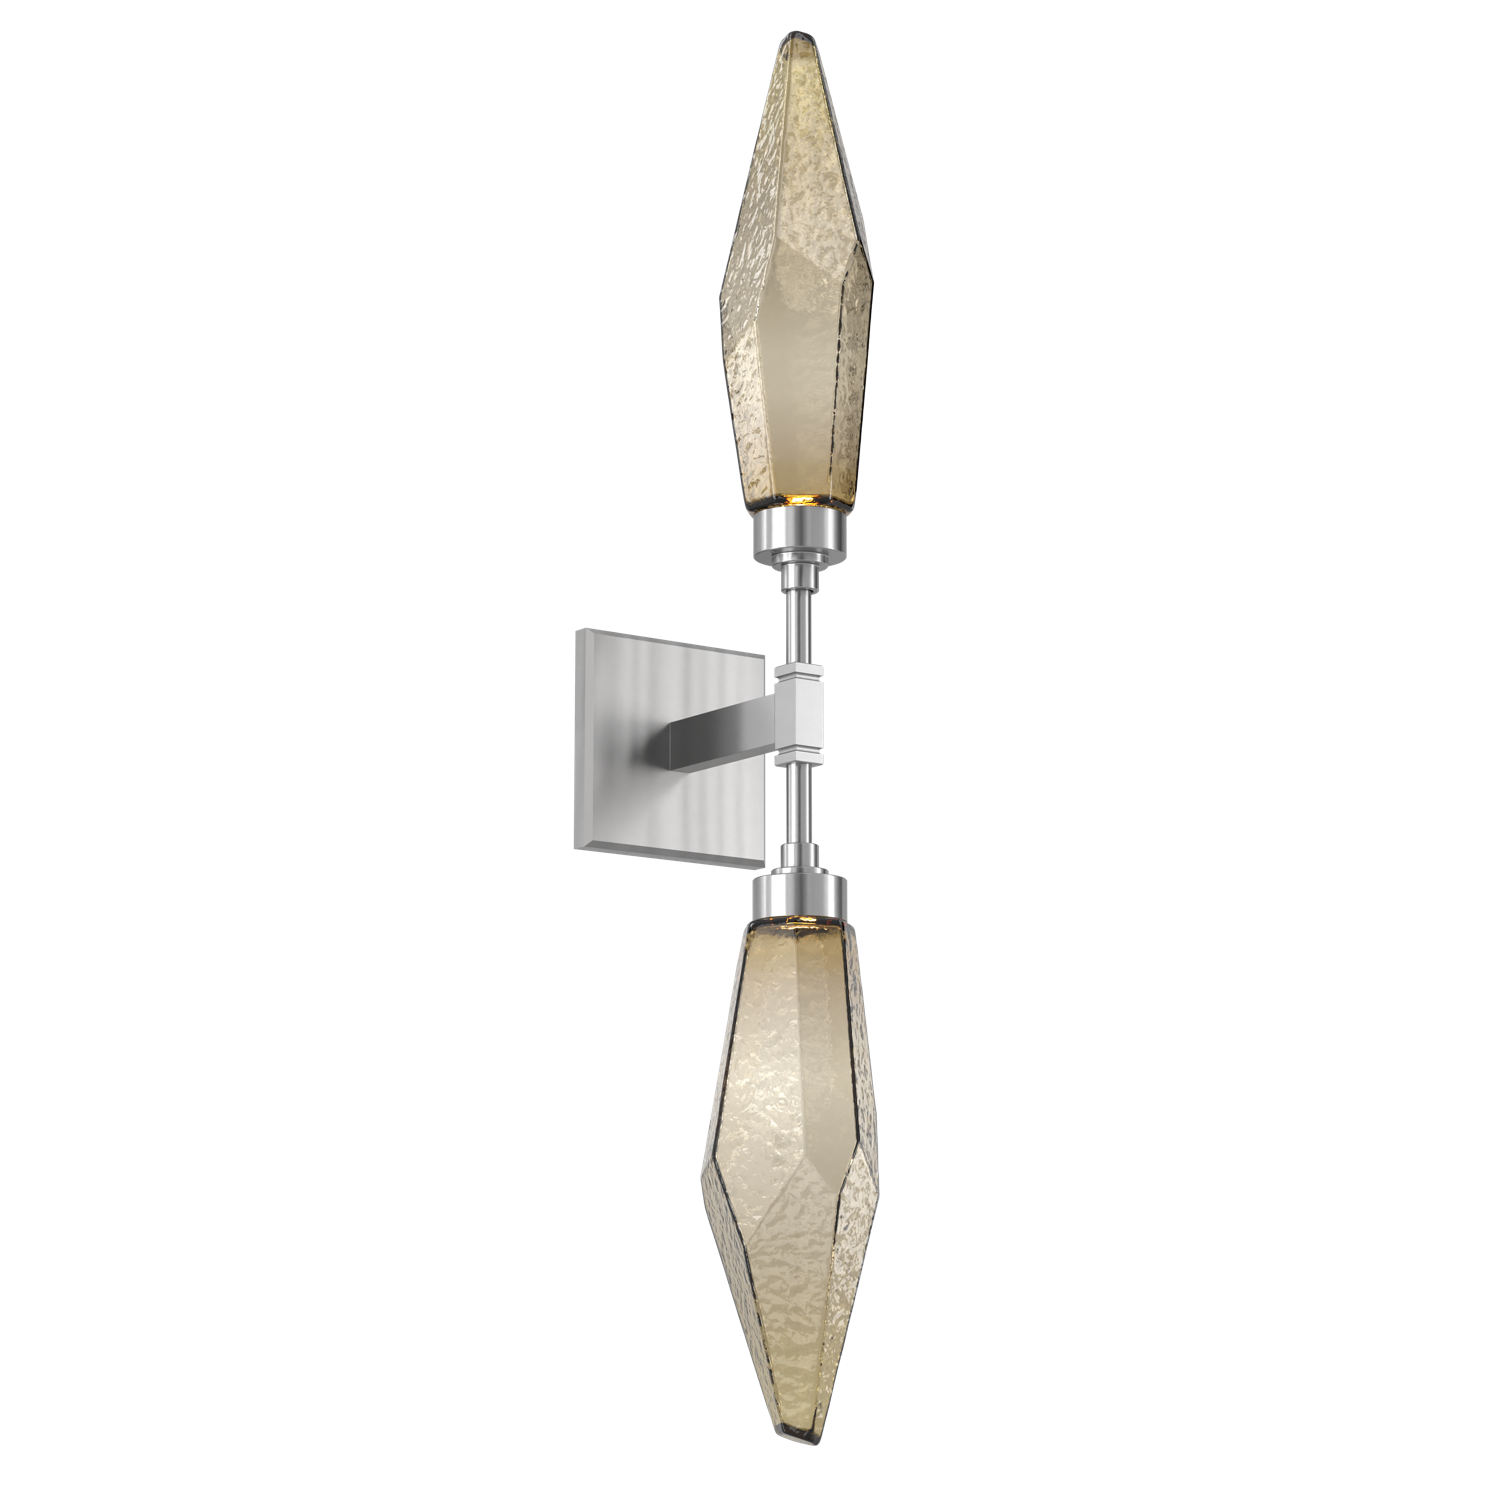 IDB0050-02-SN-CB-Hammerton-Studio-Rock-Crystal-wall-sconce-with-satin-nickel-finish-and-chilled-bronze-blown-glass-shades-and-LED-lamping